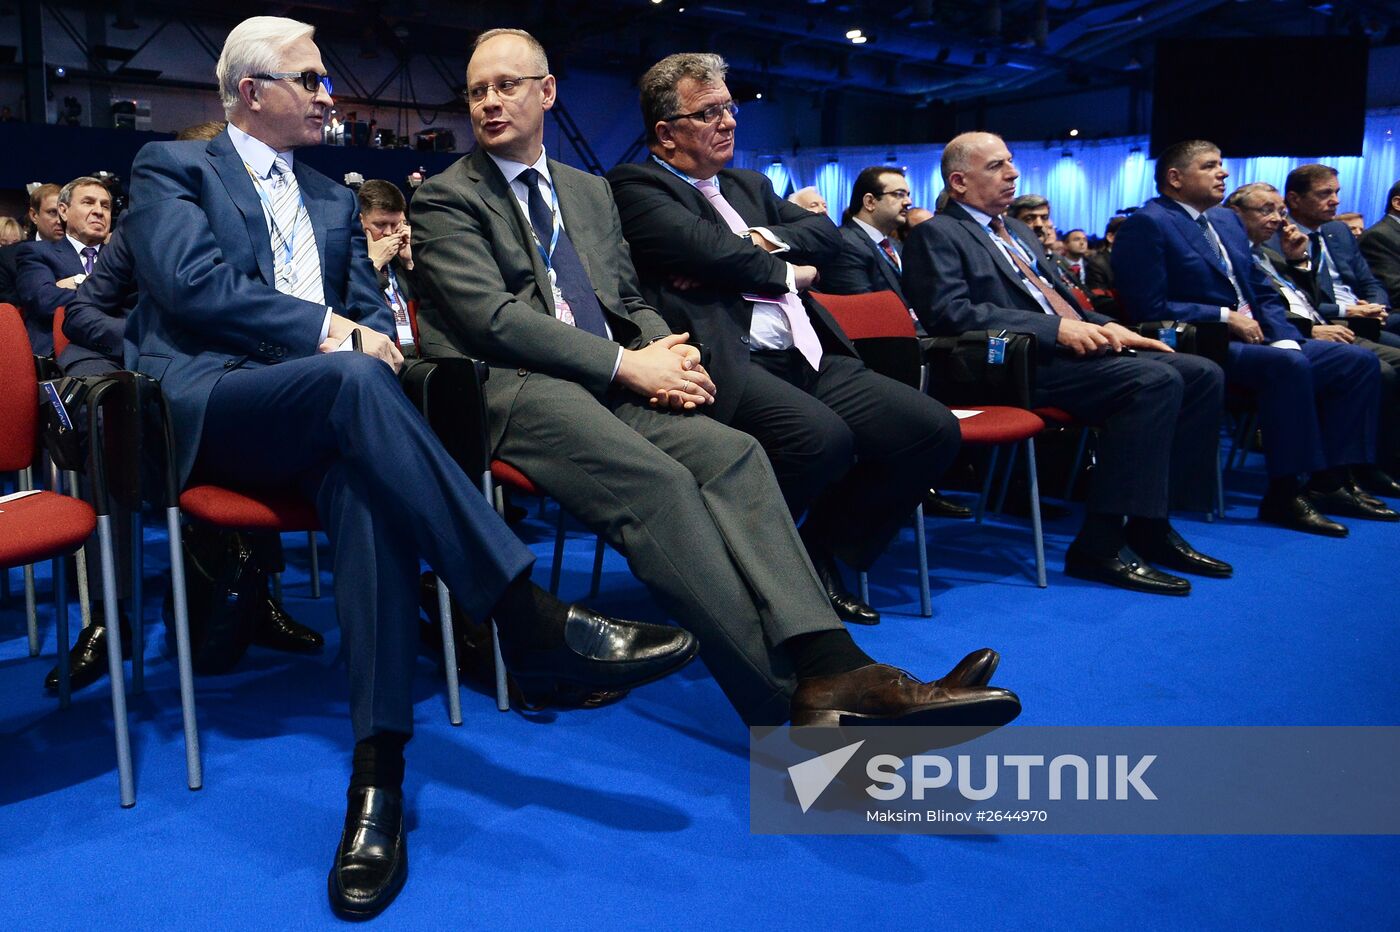 Panel session, Economics: Frank Answers to Pressing Questions, at 2015 St. Petersburg International Economic Forum